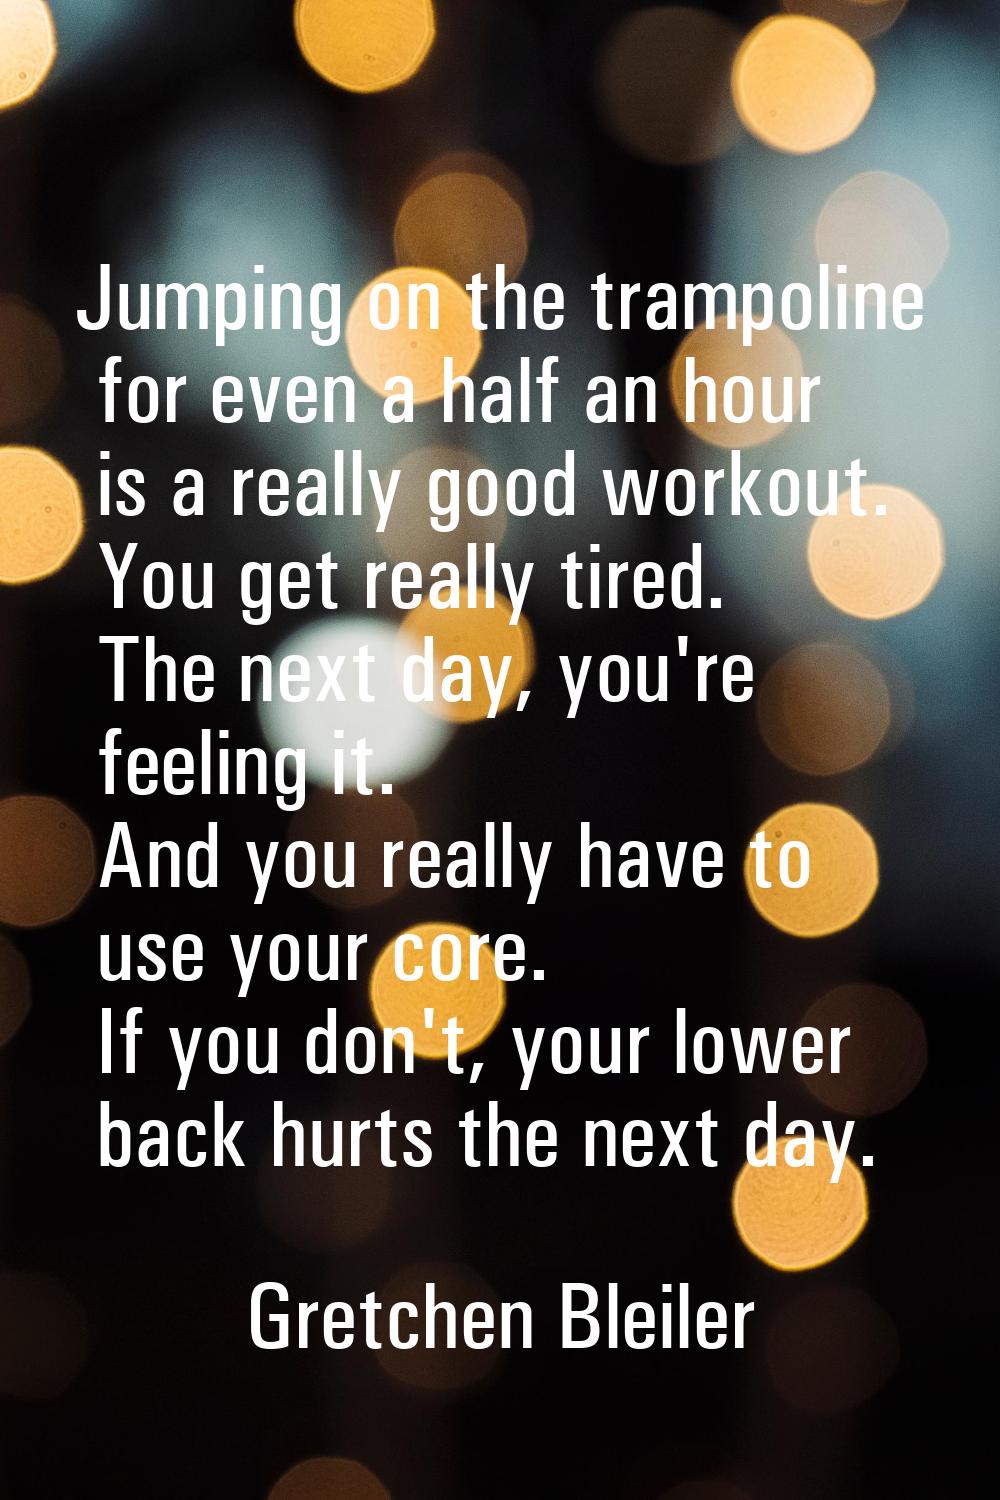 Jumping on the trampoline for even a half an hour is a really good workout. You get really tired. T